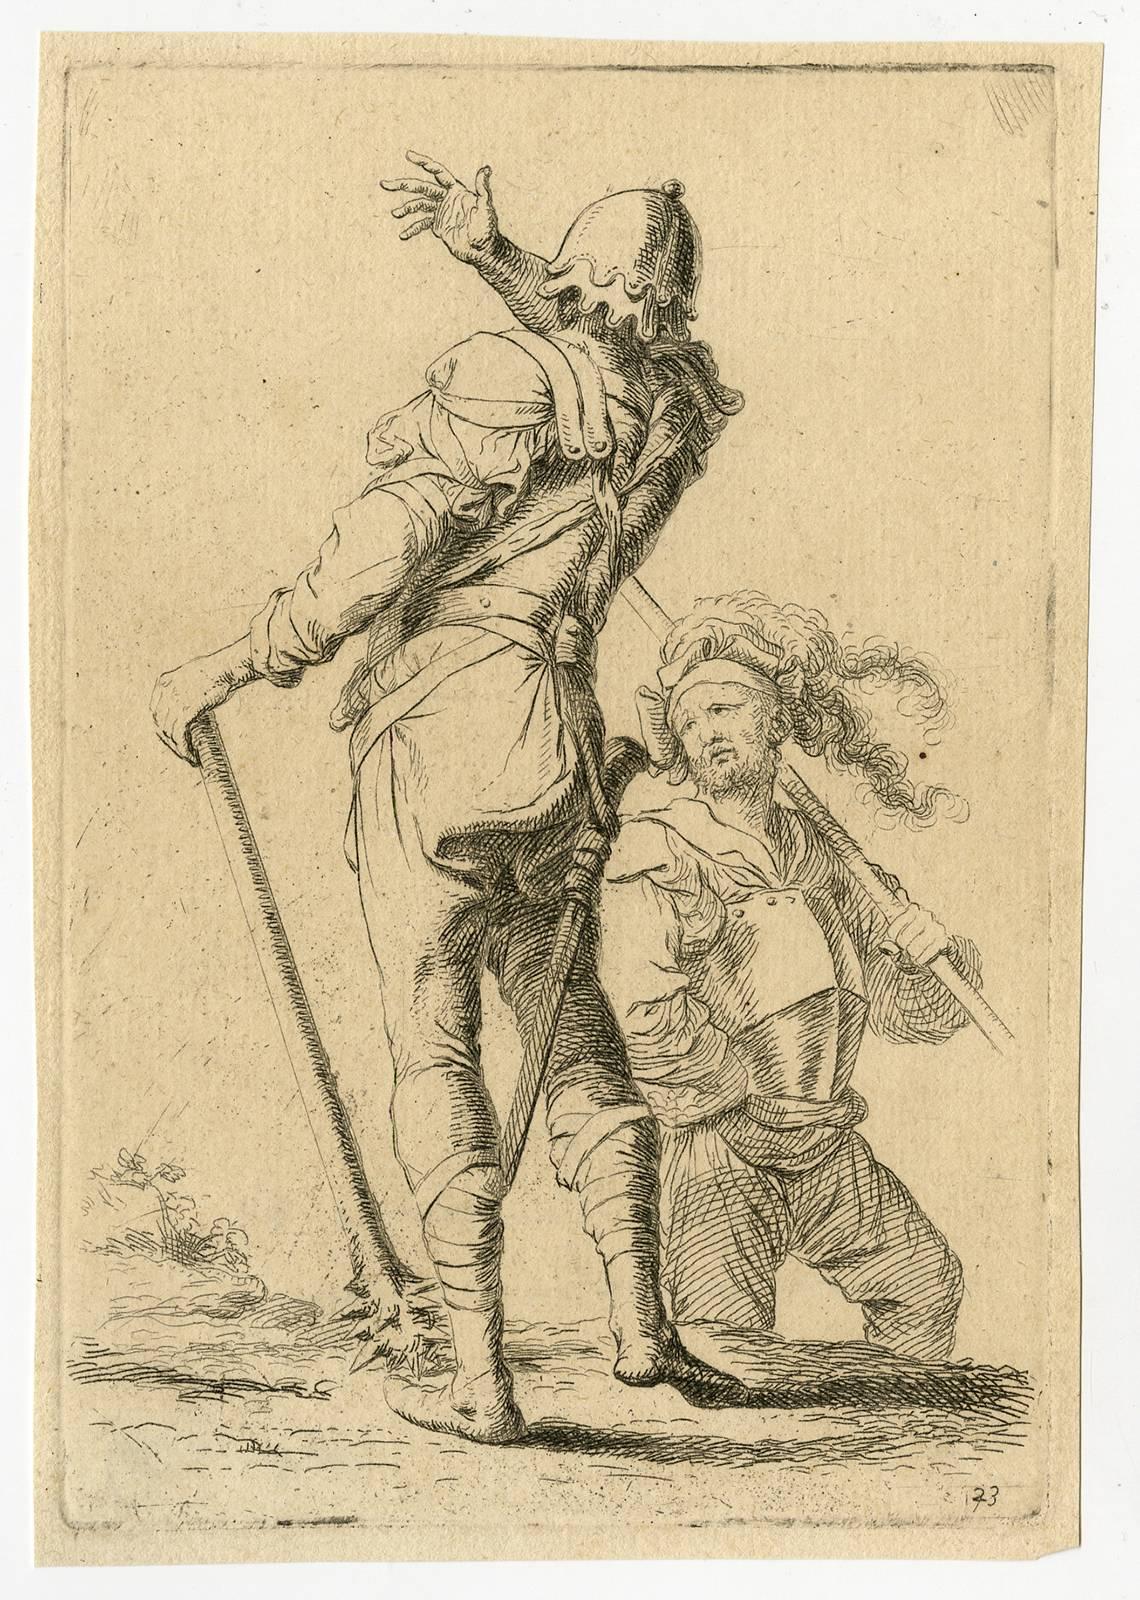 Unknown Figurative Print - Untitled - Depiction of two soldiers, one raising his arm to strike the other.